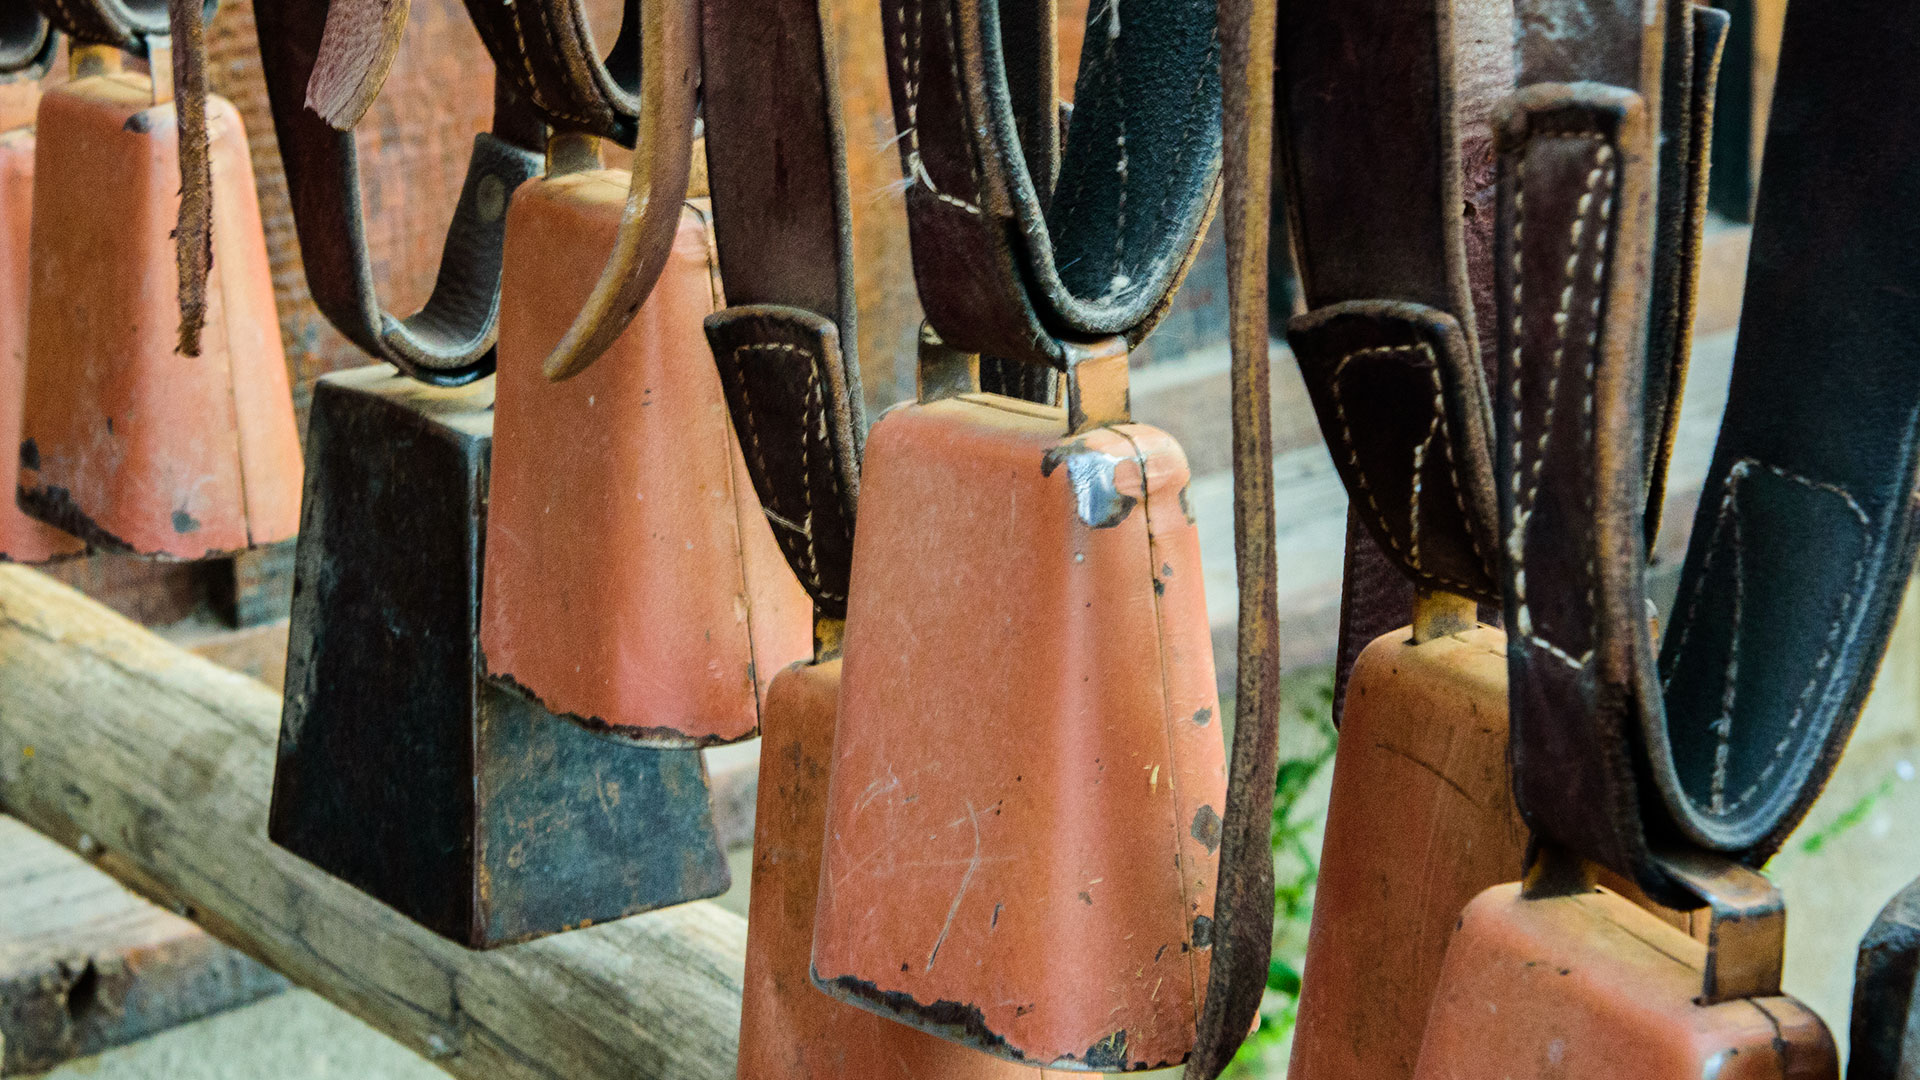 A row of hanging cow bells